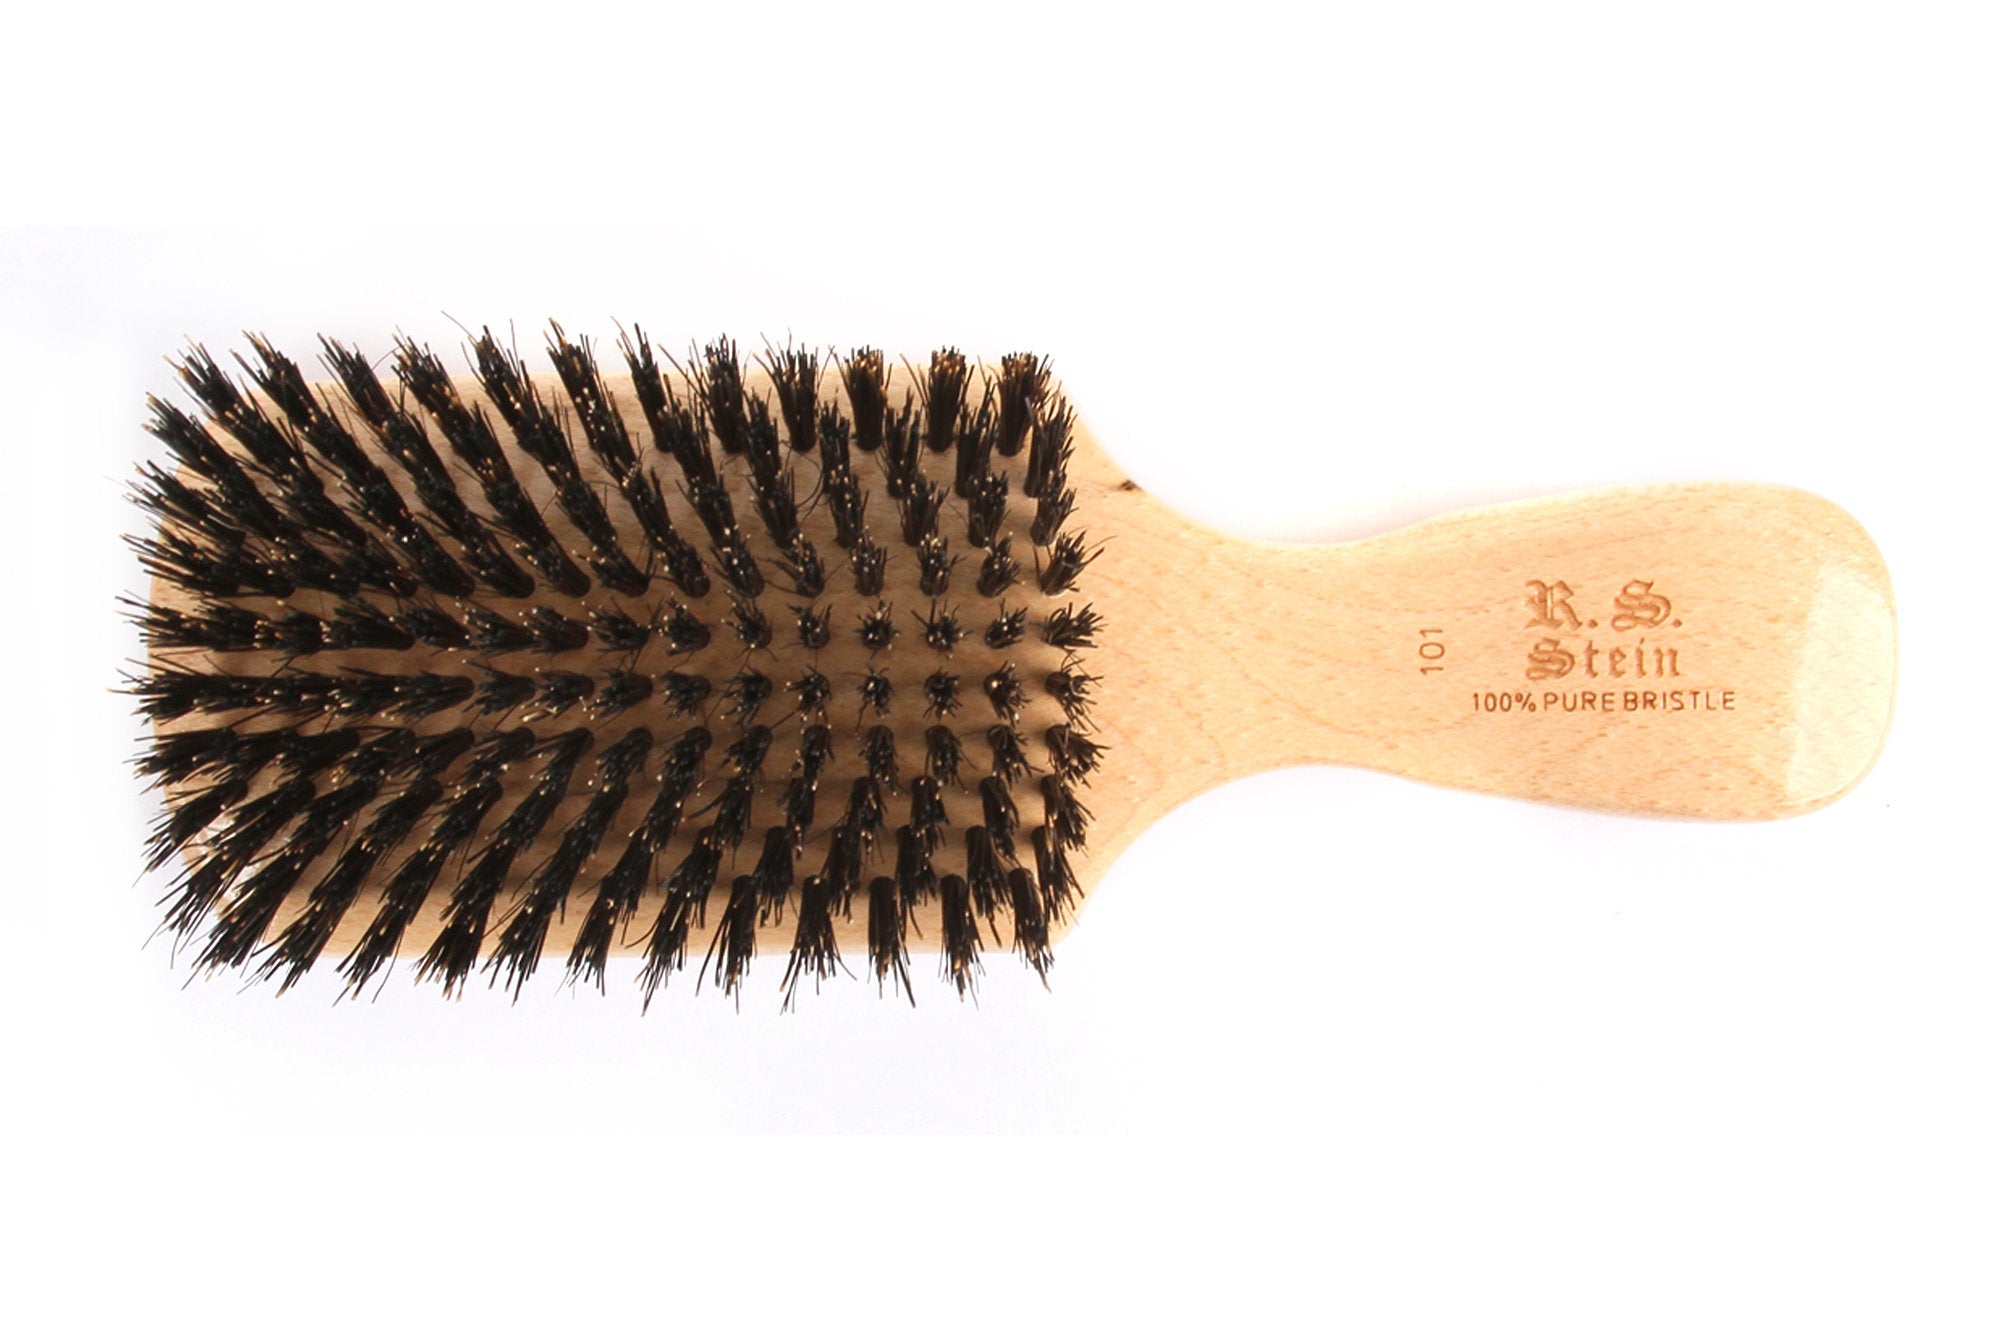 Bass Classic Club Hairbrush with Firm Natural Bristles